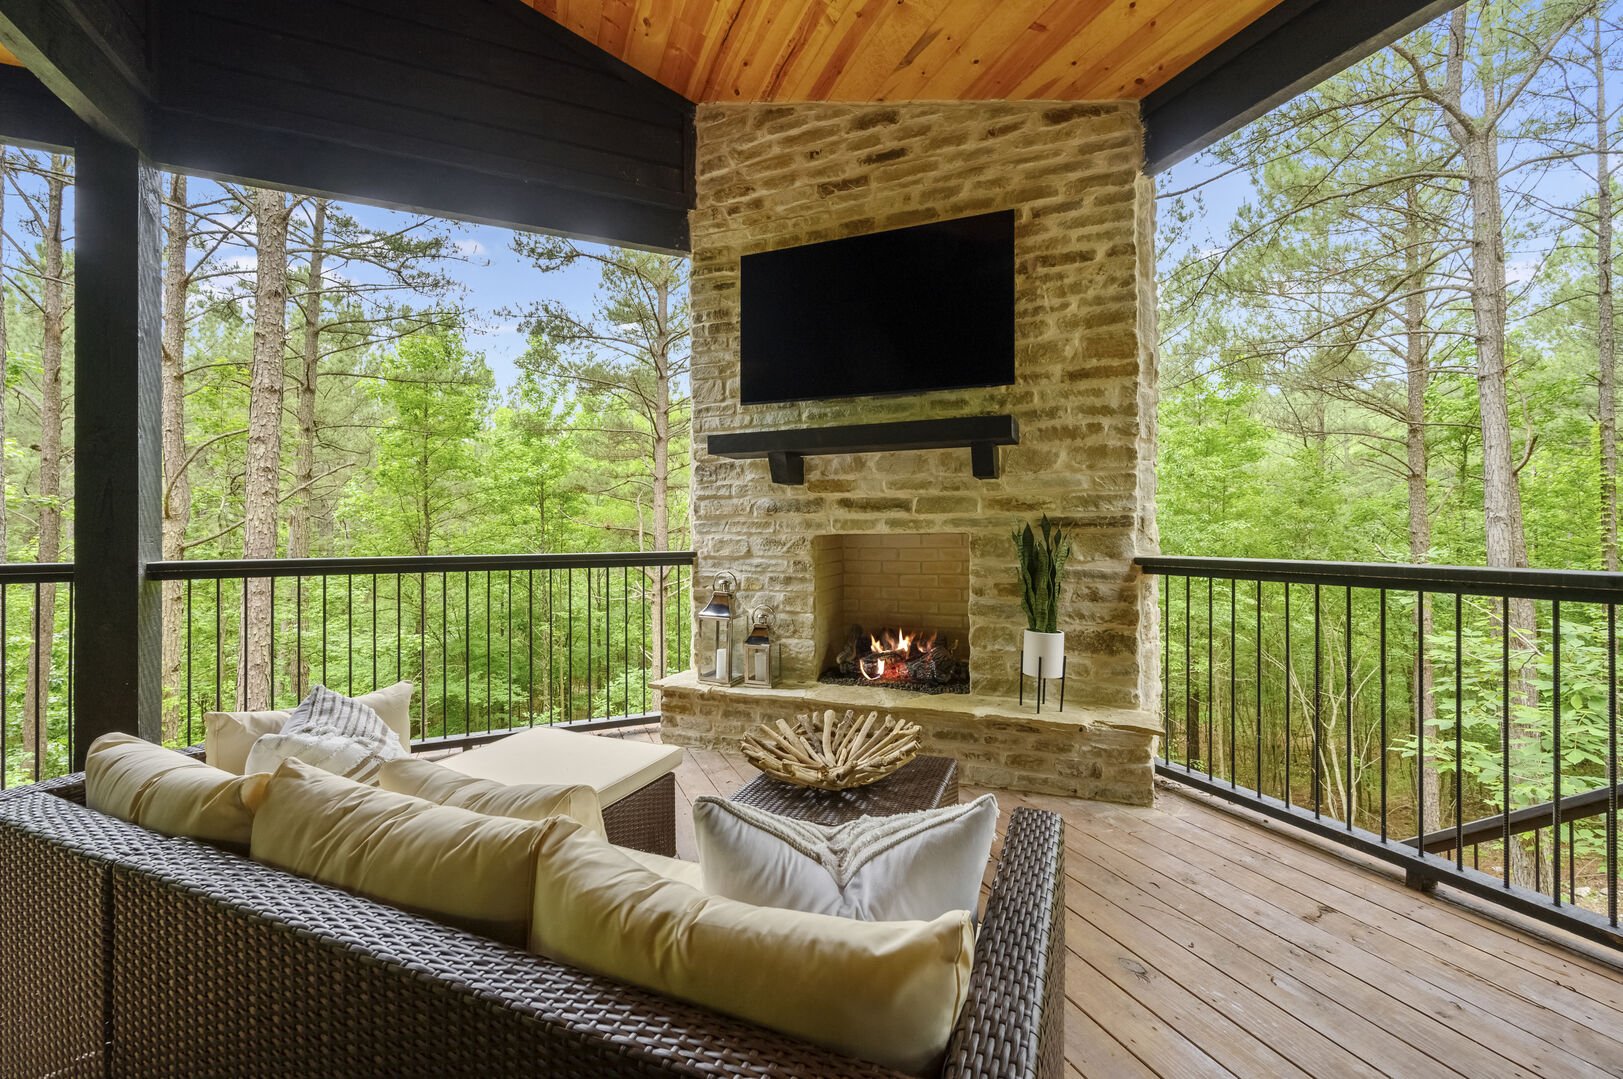 Outdoor patio includes a sitting area, flat screen TV, fireplace